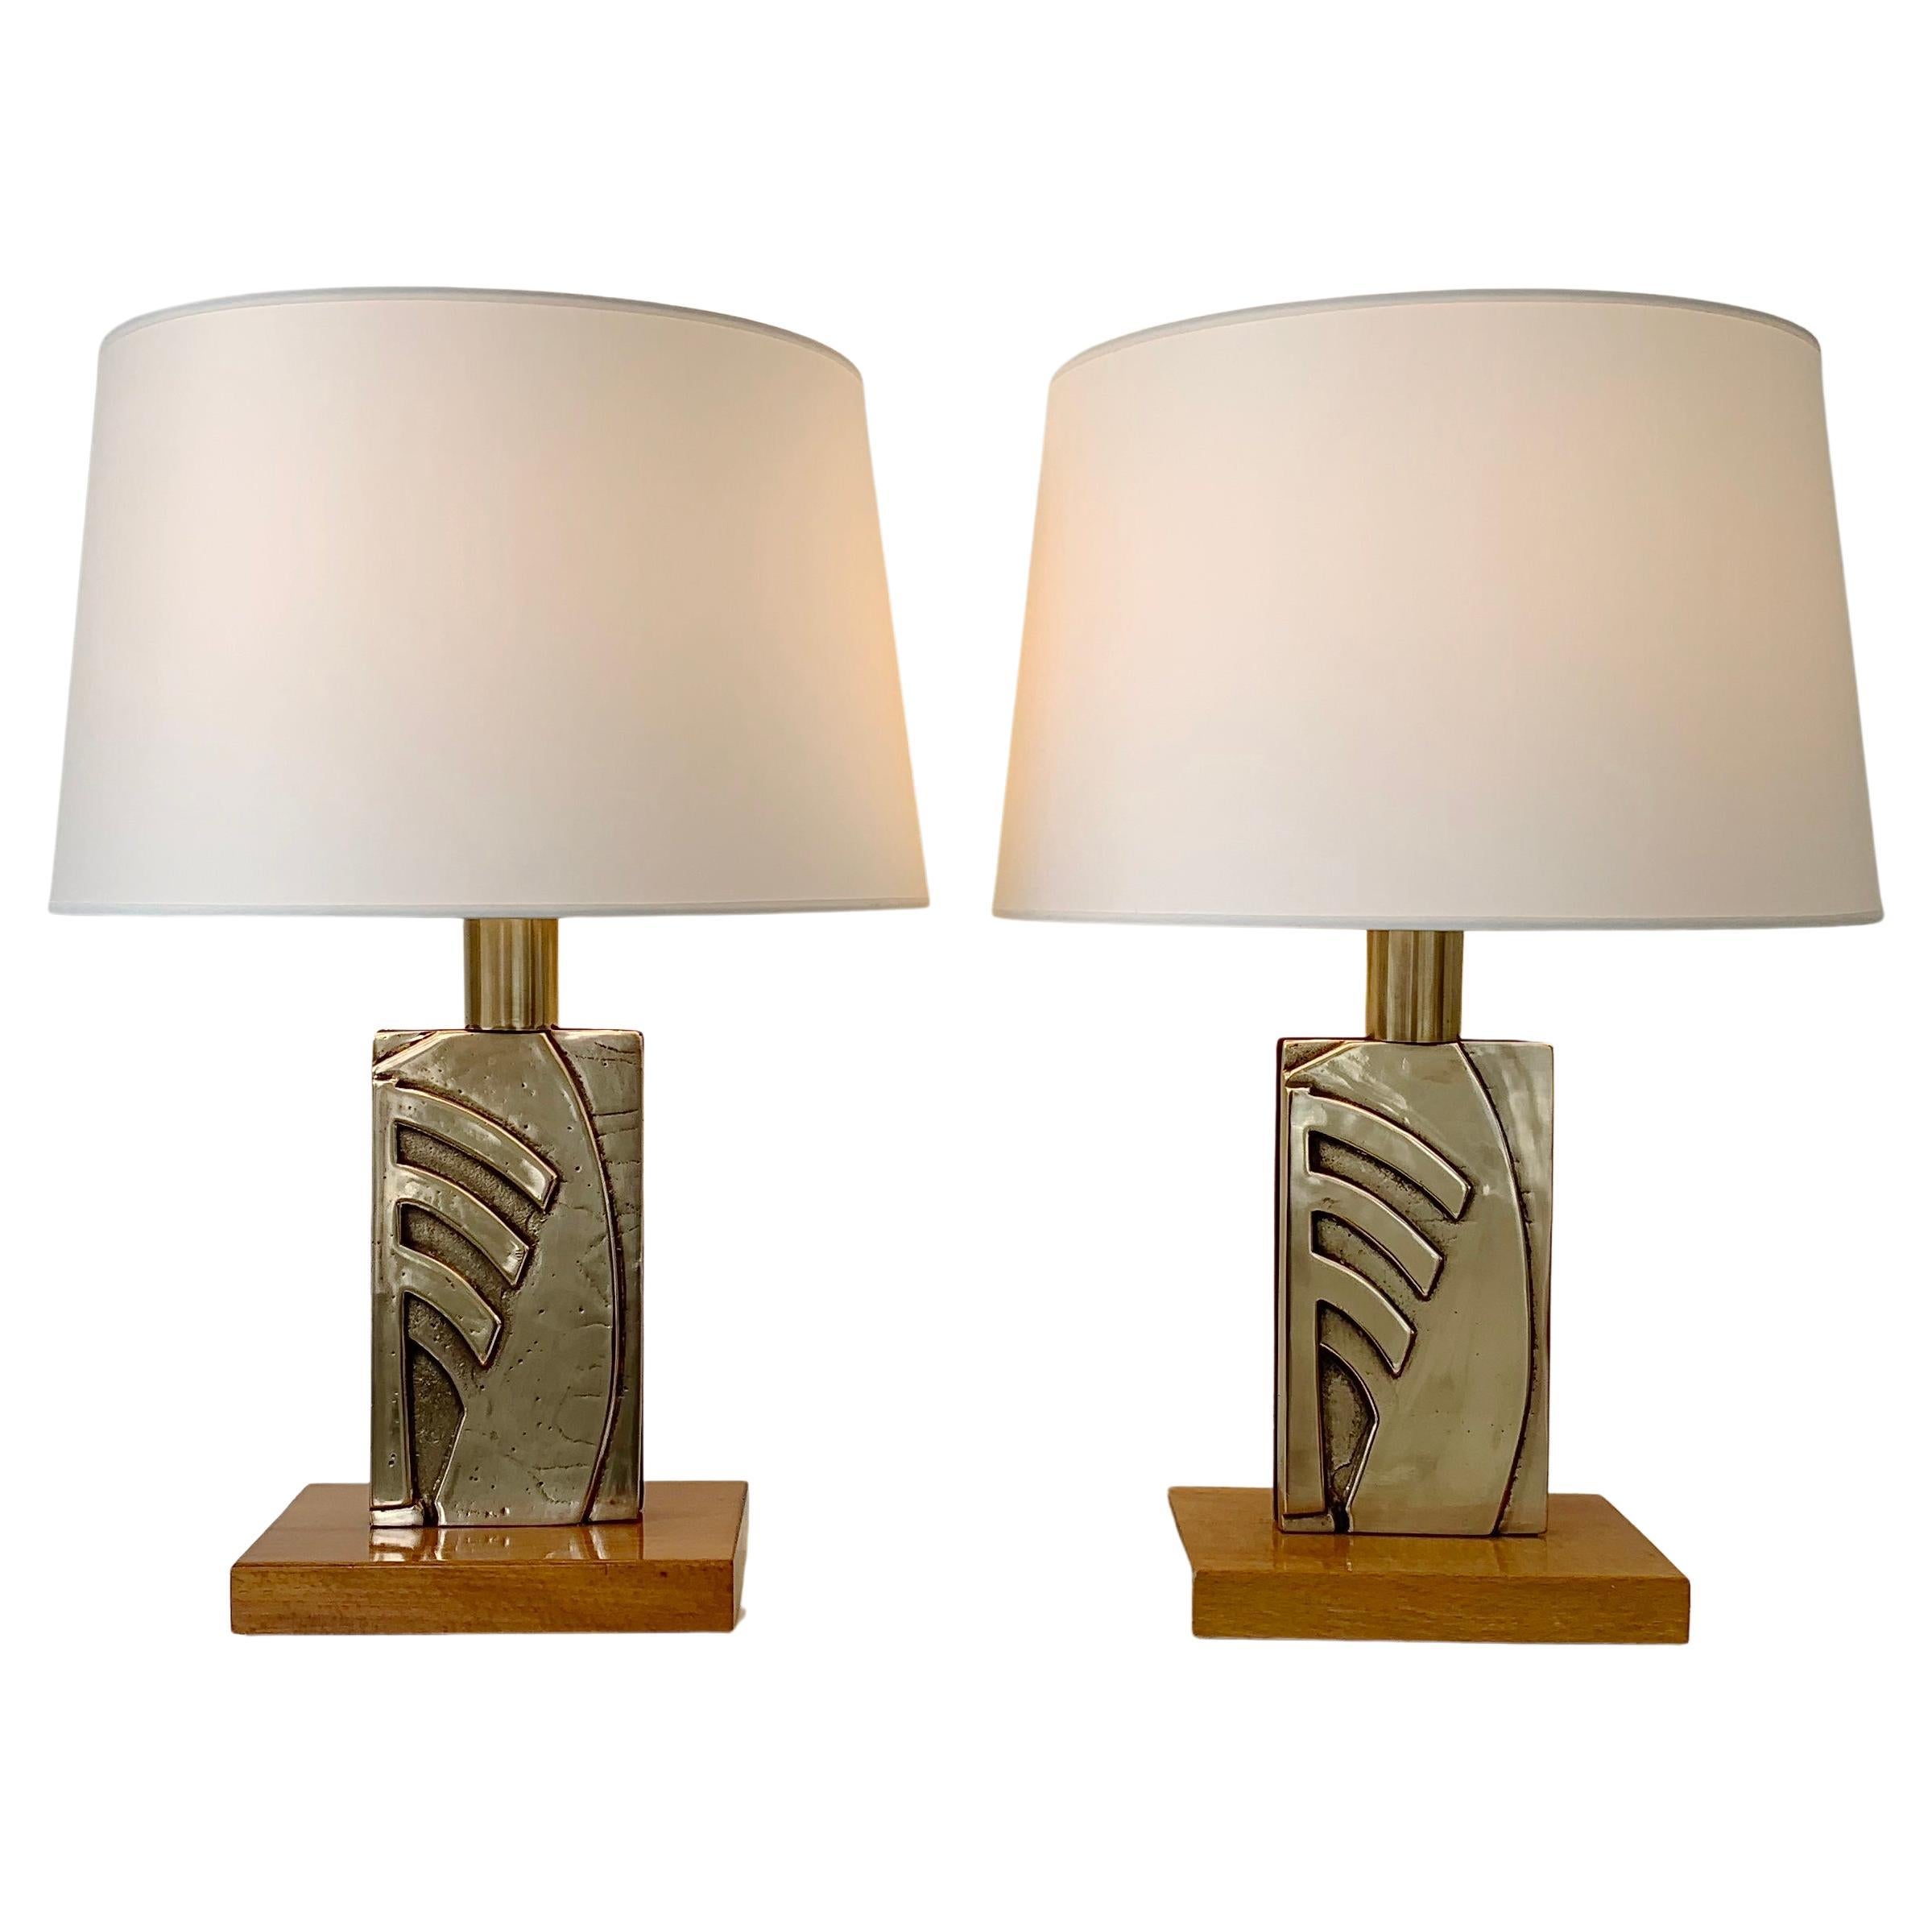 Elegant pair of midcentury table lamps, circa 1970, Italy.
Polished bronze, solid oak base, brass, new white fabric shades.
Rewired. 
Dimensions: 58 cm total height, 40 cm W, 40 cm D. 
Wood base: 22 x 15 cm, decorative bronze: 23 x 13cm
All